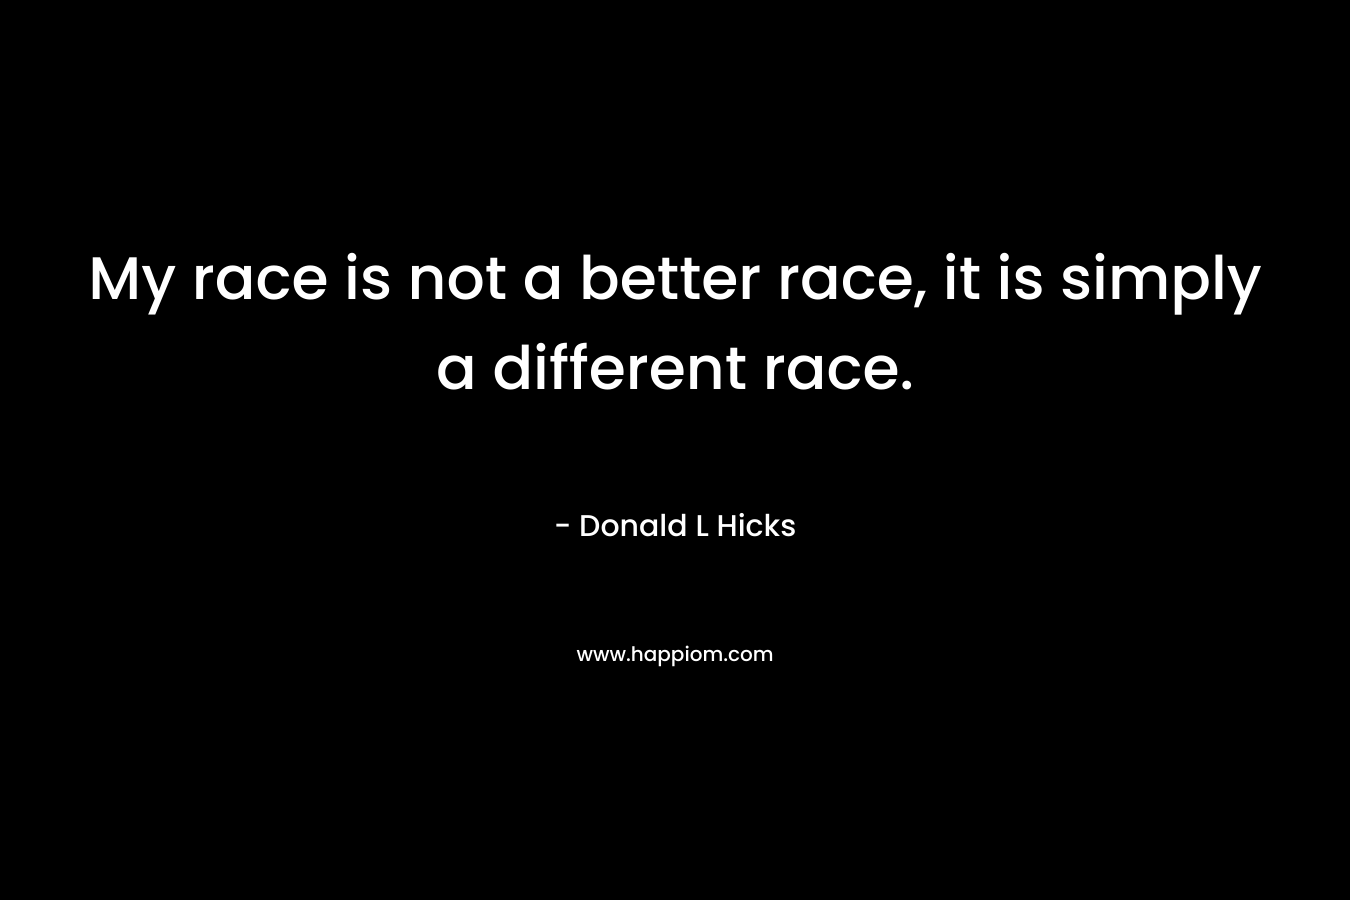 My race is not a better race, it is simply a different race.